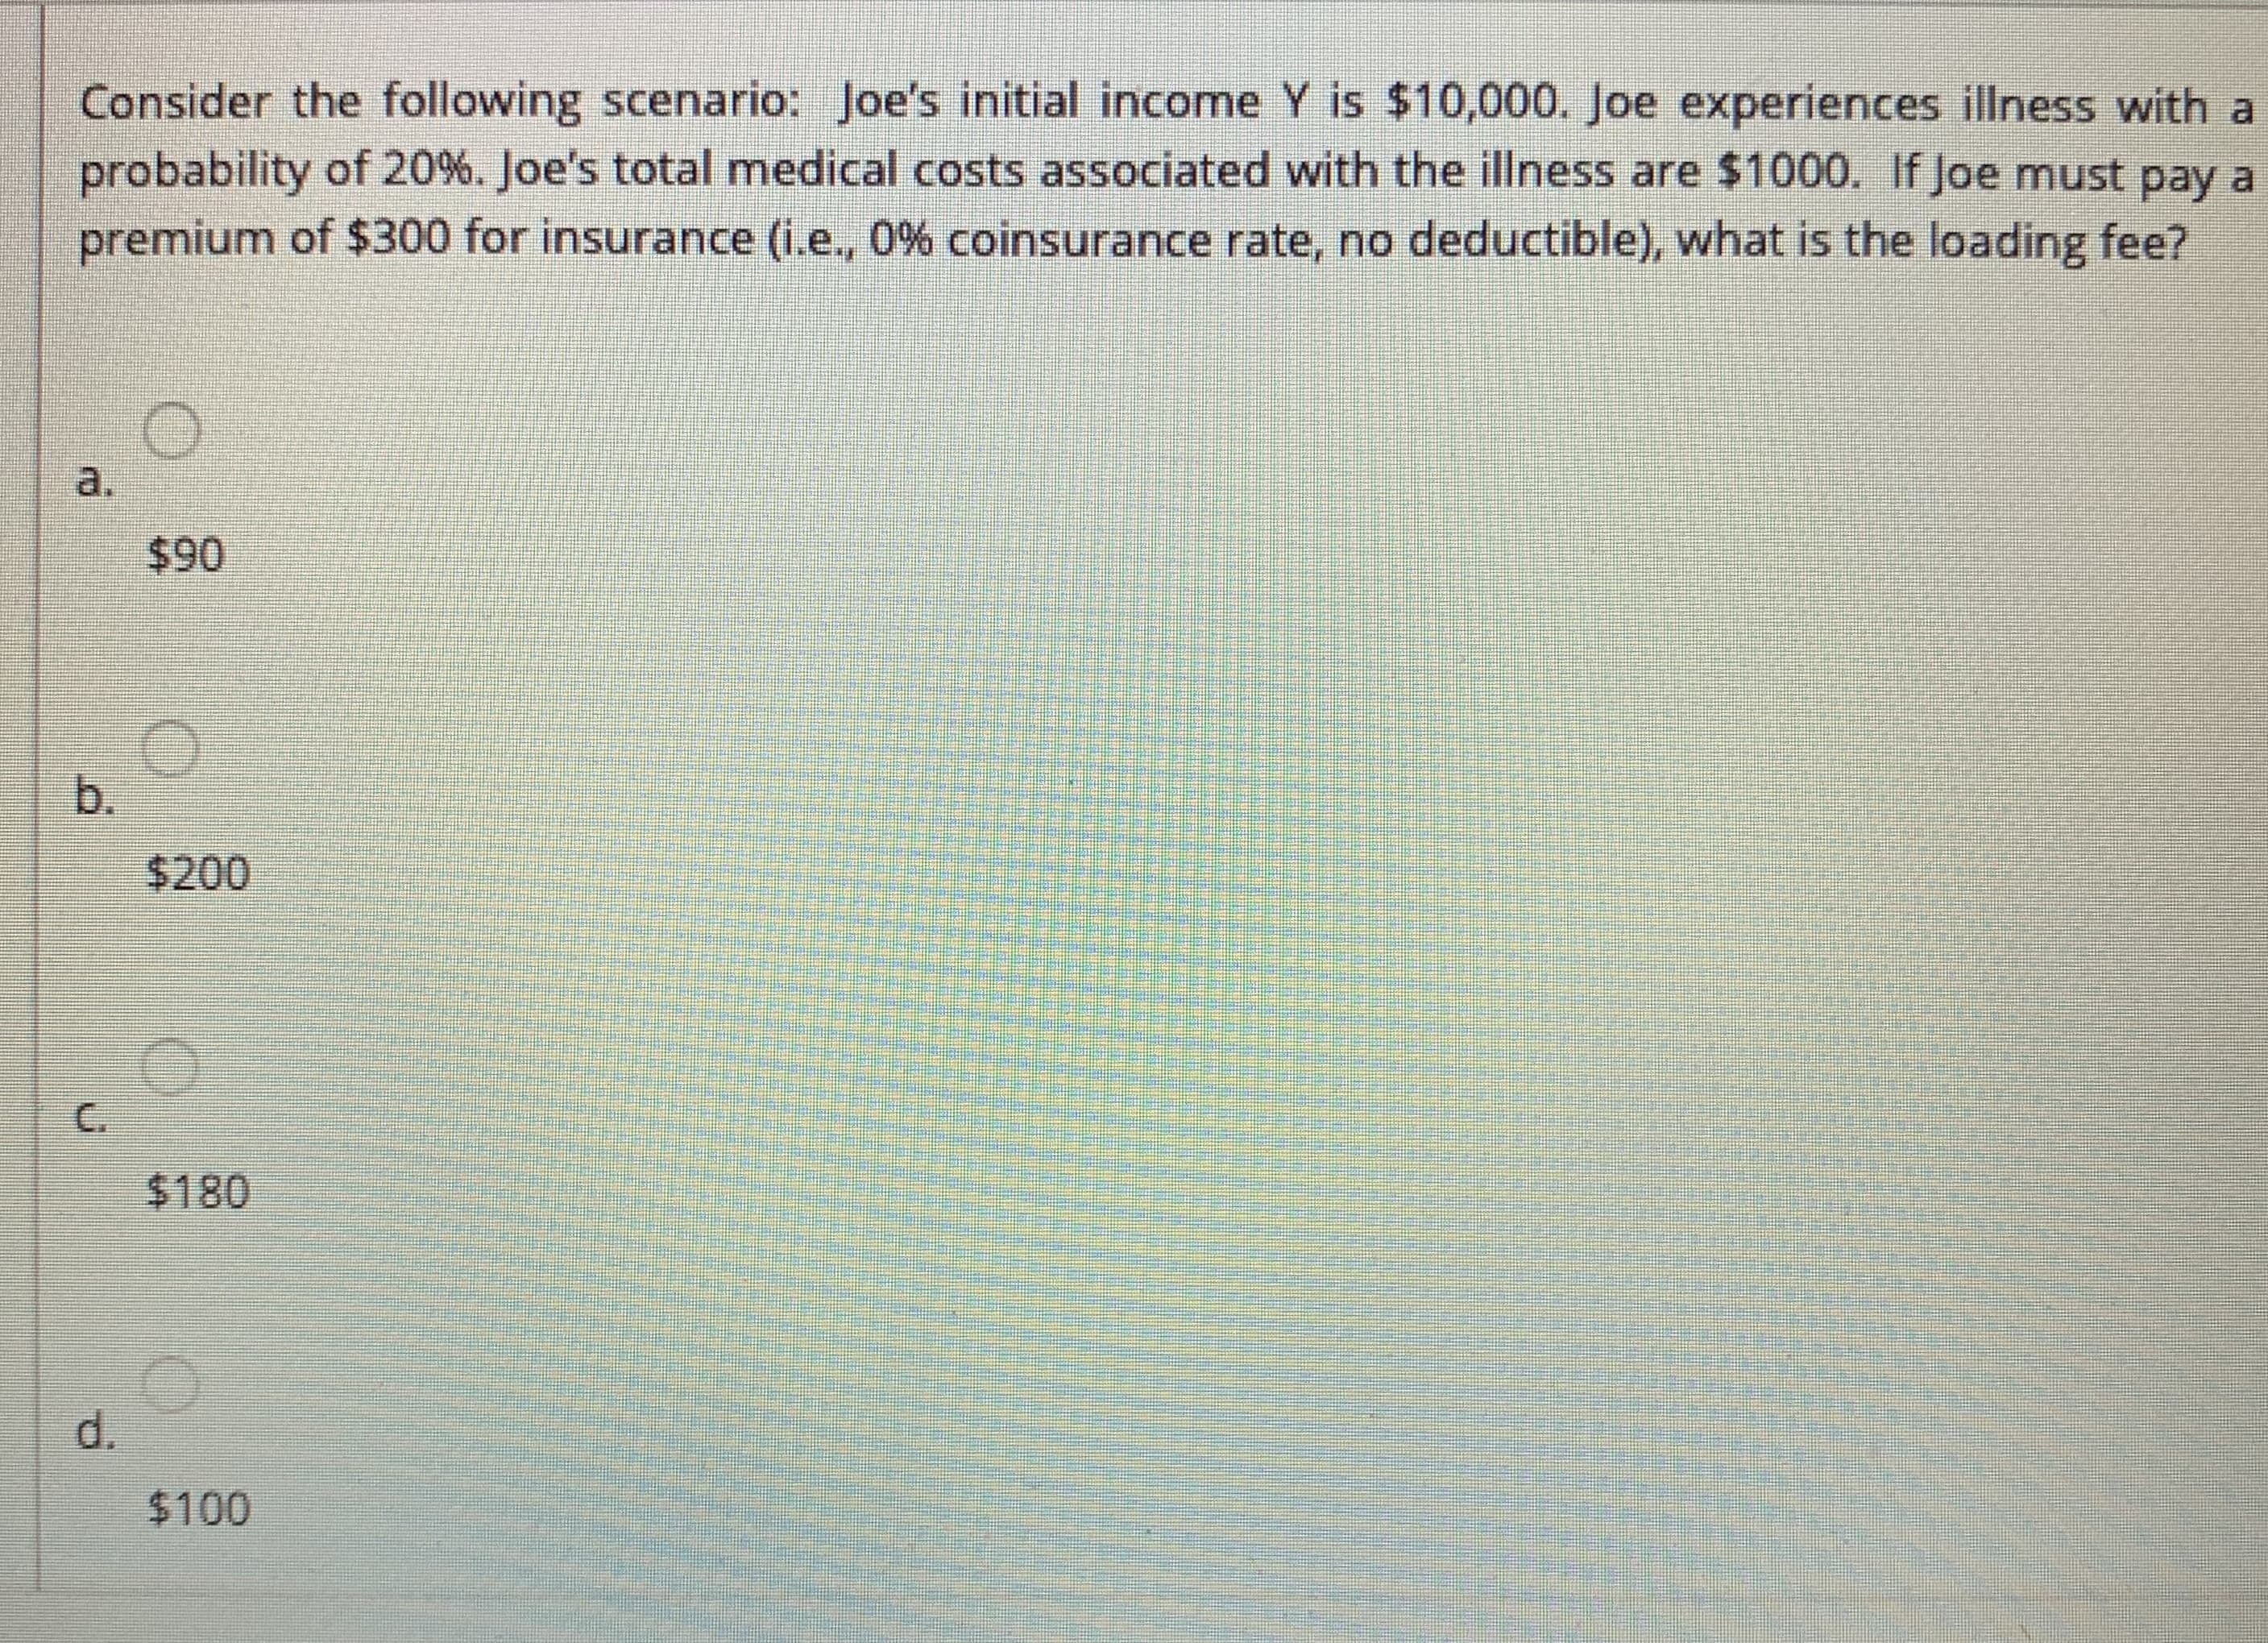 Consider the following scenario: Joe's initial income Y is $10,000. Joe experiences illness with a
probability of 20%. Joe's total medical costs associated with the illness are $1000. If Joe must pay a
premium of $300 for insurance (i.e., 0% coinsurance rate, no deductible), what is the loading fee?
a.
$90
b.
$200
C.
$180
d.
$100
